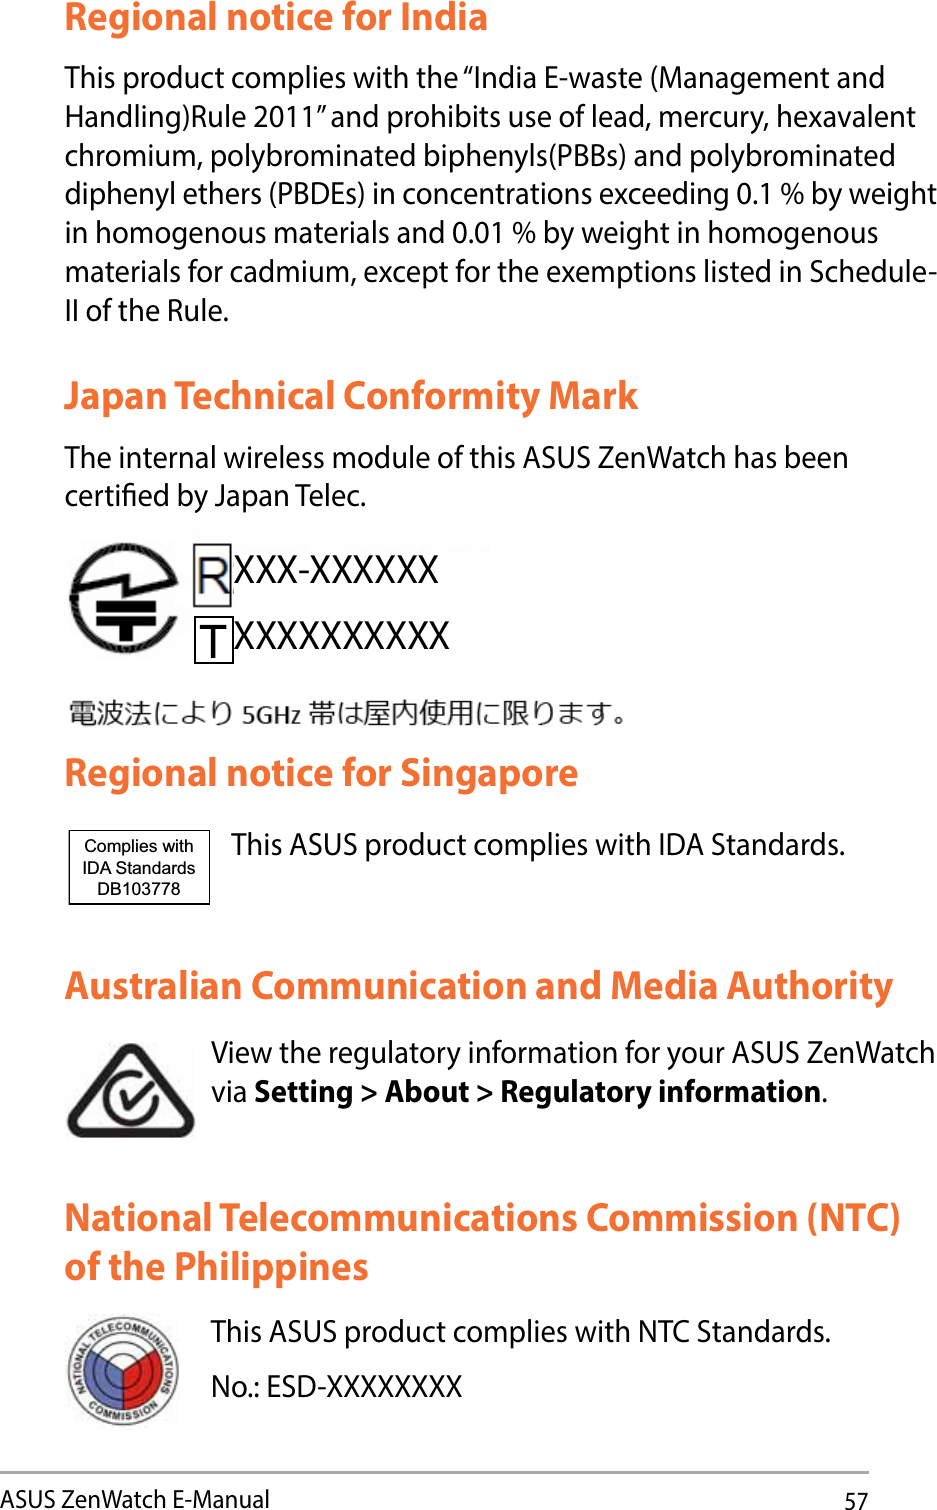 57ASUS ZenWatch E-ManualRegional notice for IndiaThis product complies with the “India E-waste (Management and Handling)Rule 2011” and prohibits use of lead, mercury, hexavalent chromium, polybrominated biphenyls(PBBs) and polybrominated diphenyl ethers (PBDEs) in concentrations exceeding 0.1 % by weight in homogenous materials and 0.01 % by weight in homogenous materials for cadmium, except for the exemptions listed in Schedule-II of the Rule.Australian Communication and Media AuthorityView the regulatory information for your ASUS ZenWatch via Setting &gt; About &gt; Regulatory information.National Telecommunications Commission (NTC) of the PhilippinesThis ASUS product complies with NTC Standards.No.: ESD-XXXXXXXXJapan Technical Conformity MarkThe internal wireless module of this ASUS ZenWatch has been certied by Japan Telec.Regional notice for SingaporeThis ASUS product complies with IDA Standards.Complies with IDA StandardsDB103778 XXX-XXXXXXXXXXXXXXXX